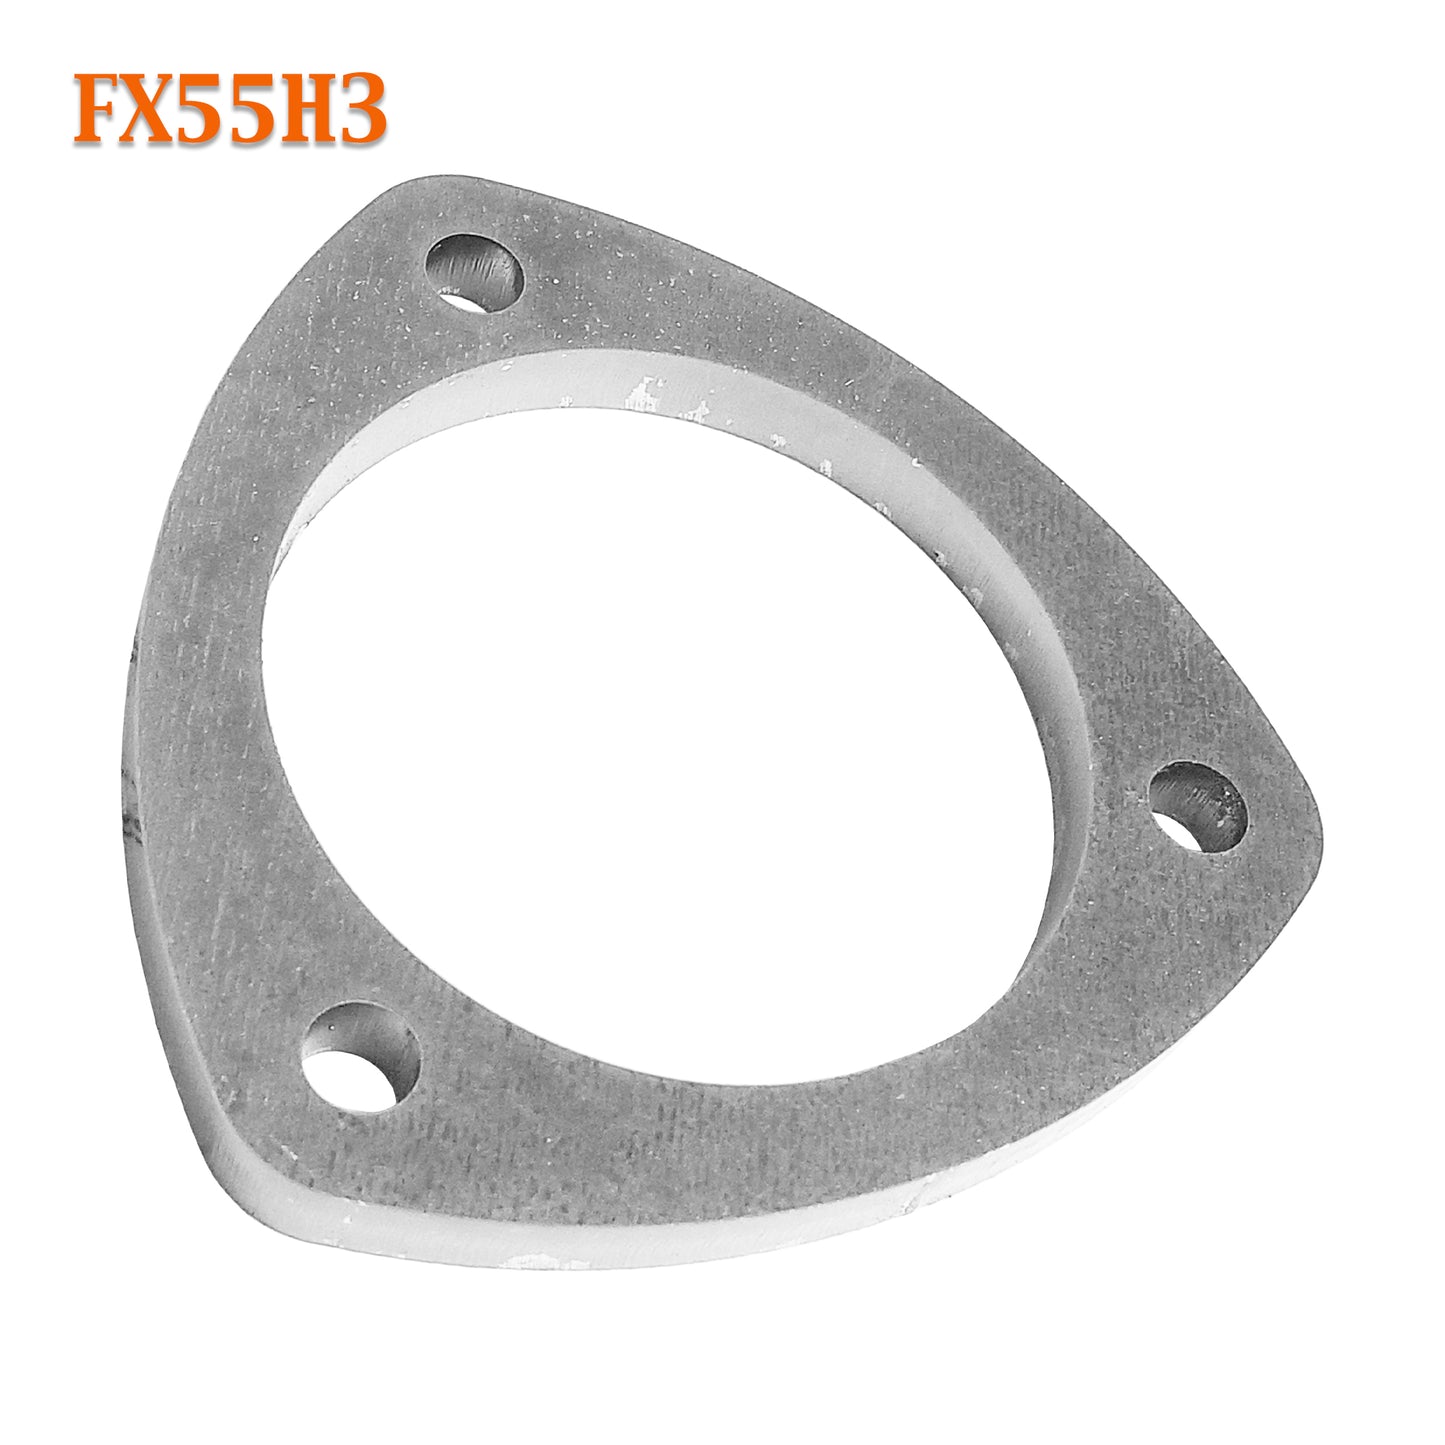 FX55H3 3" ID Flat Triangle Three Bolt Heavy Duty Exhaust Flange For 3" Pipe